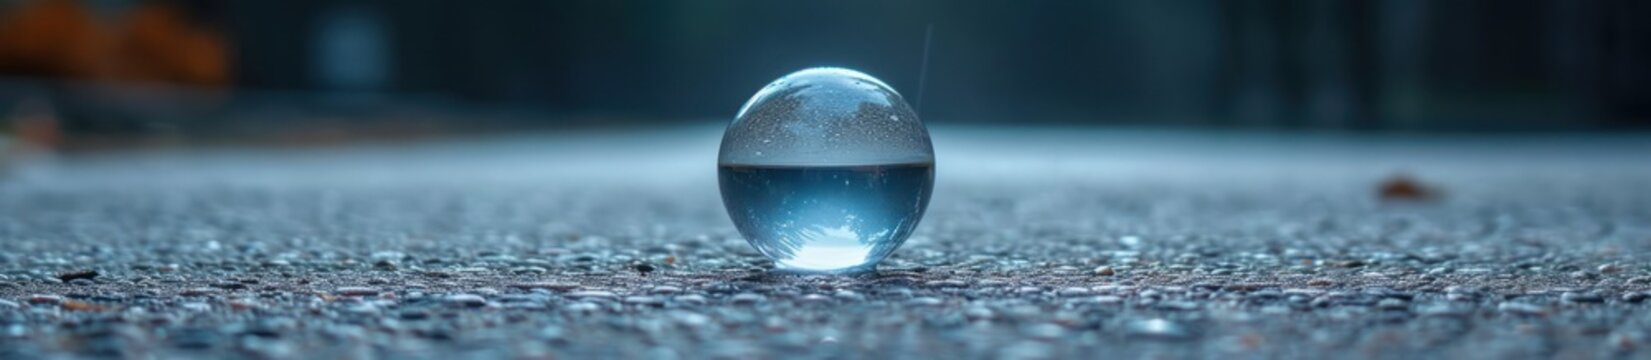 a blue blown out raindrop with a water droplet,   teal and silver, back button focus